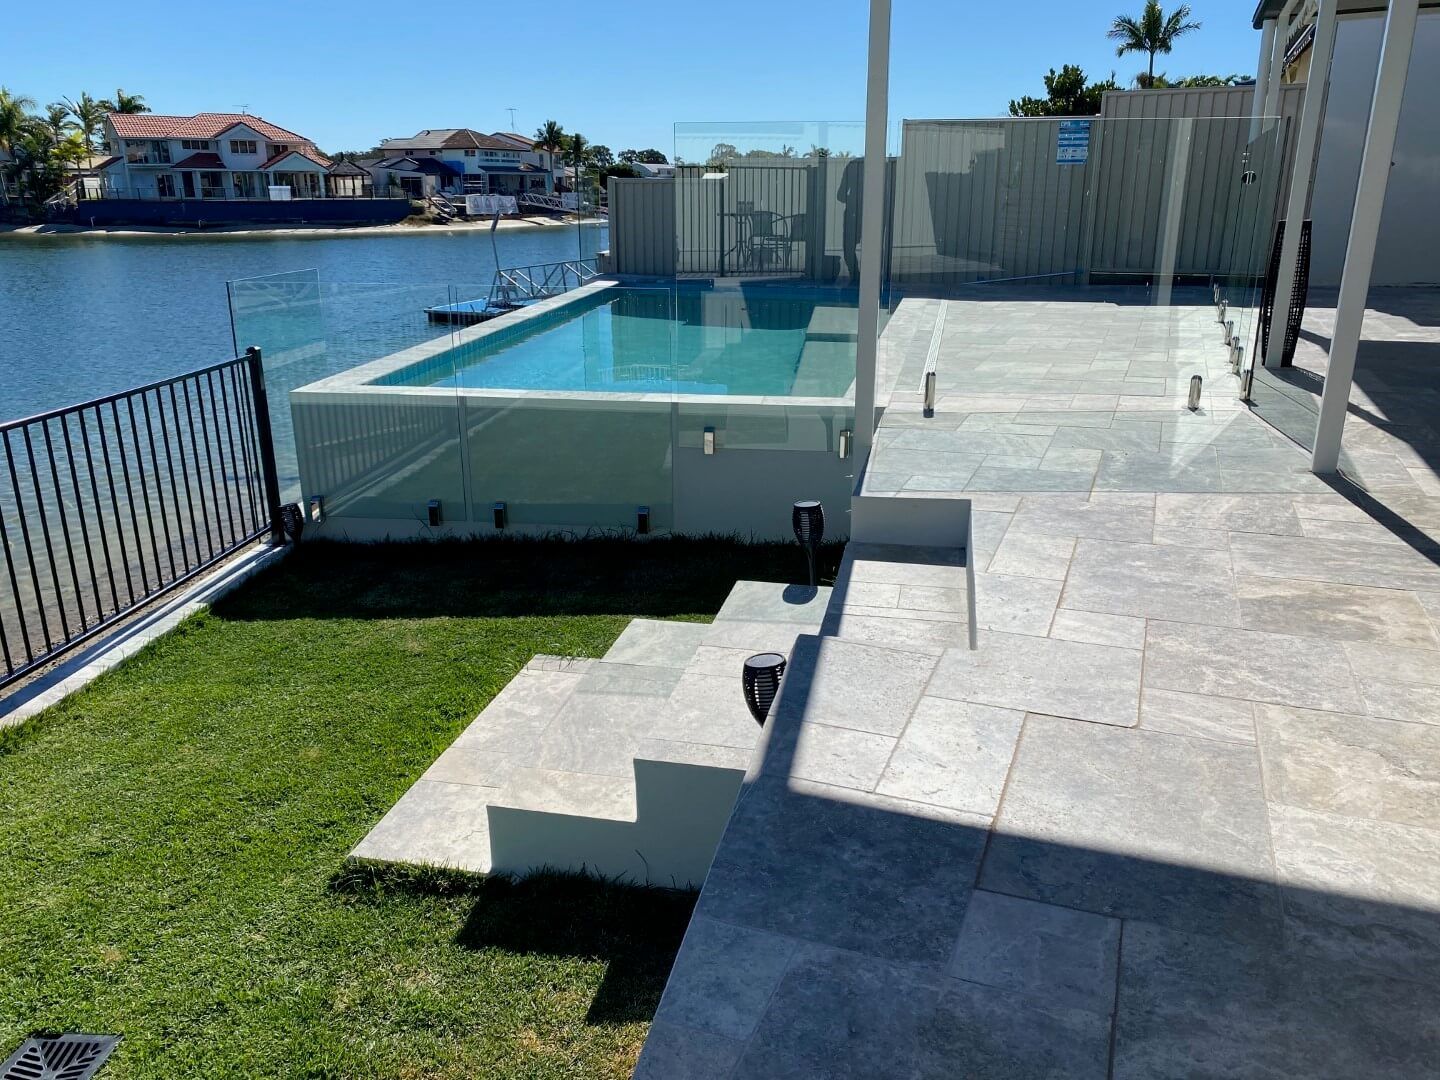 Pool Surrounds, Glass Pool Fencing, Tiled Outdoor Area